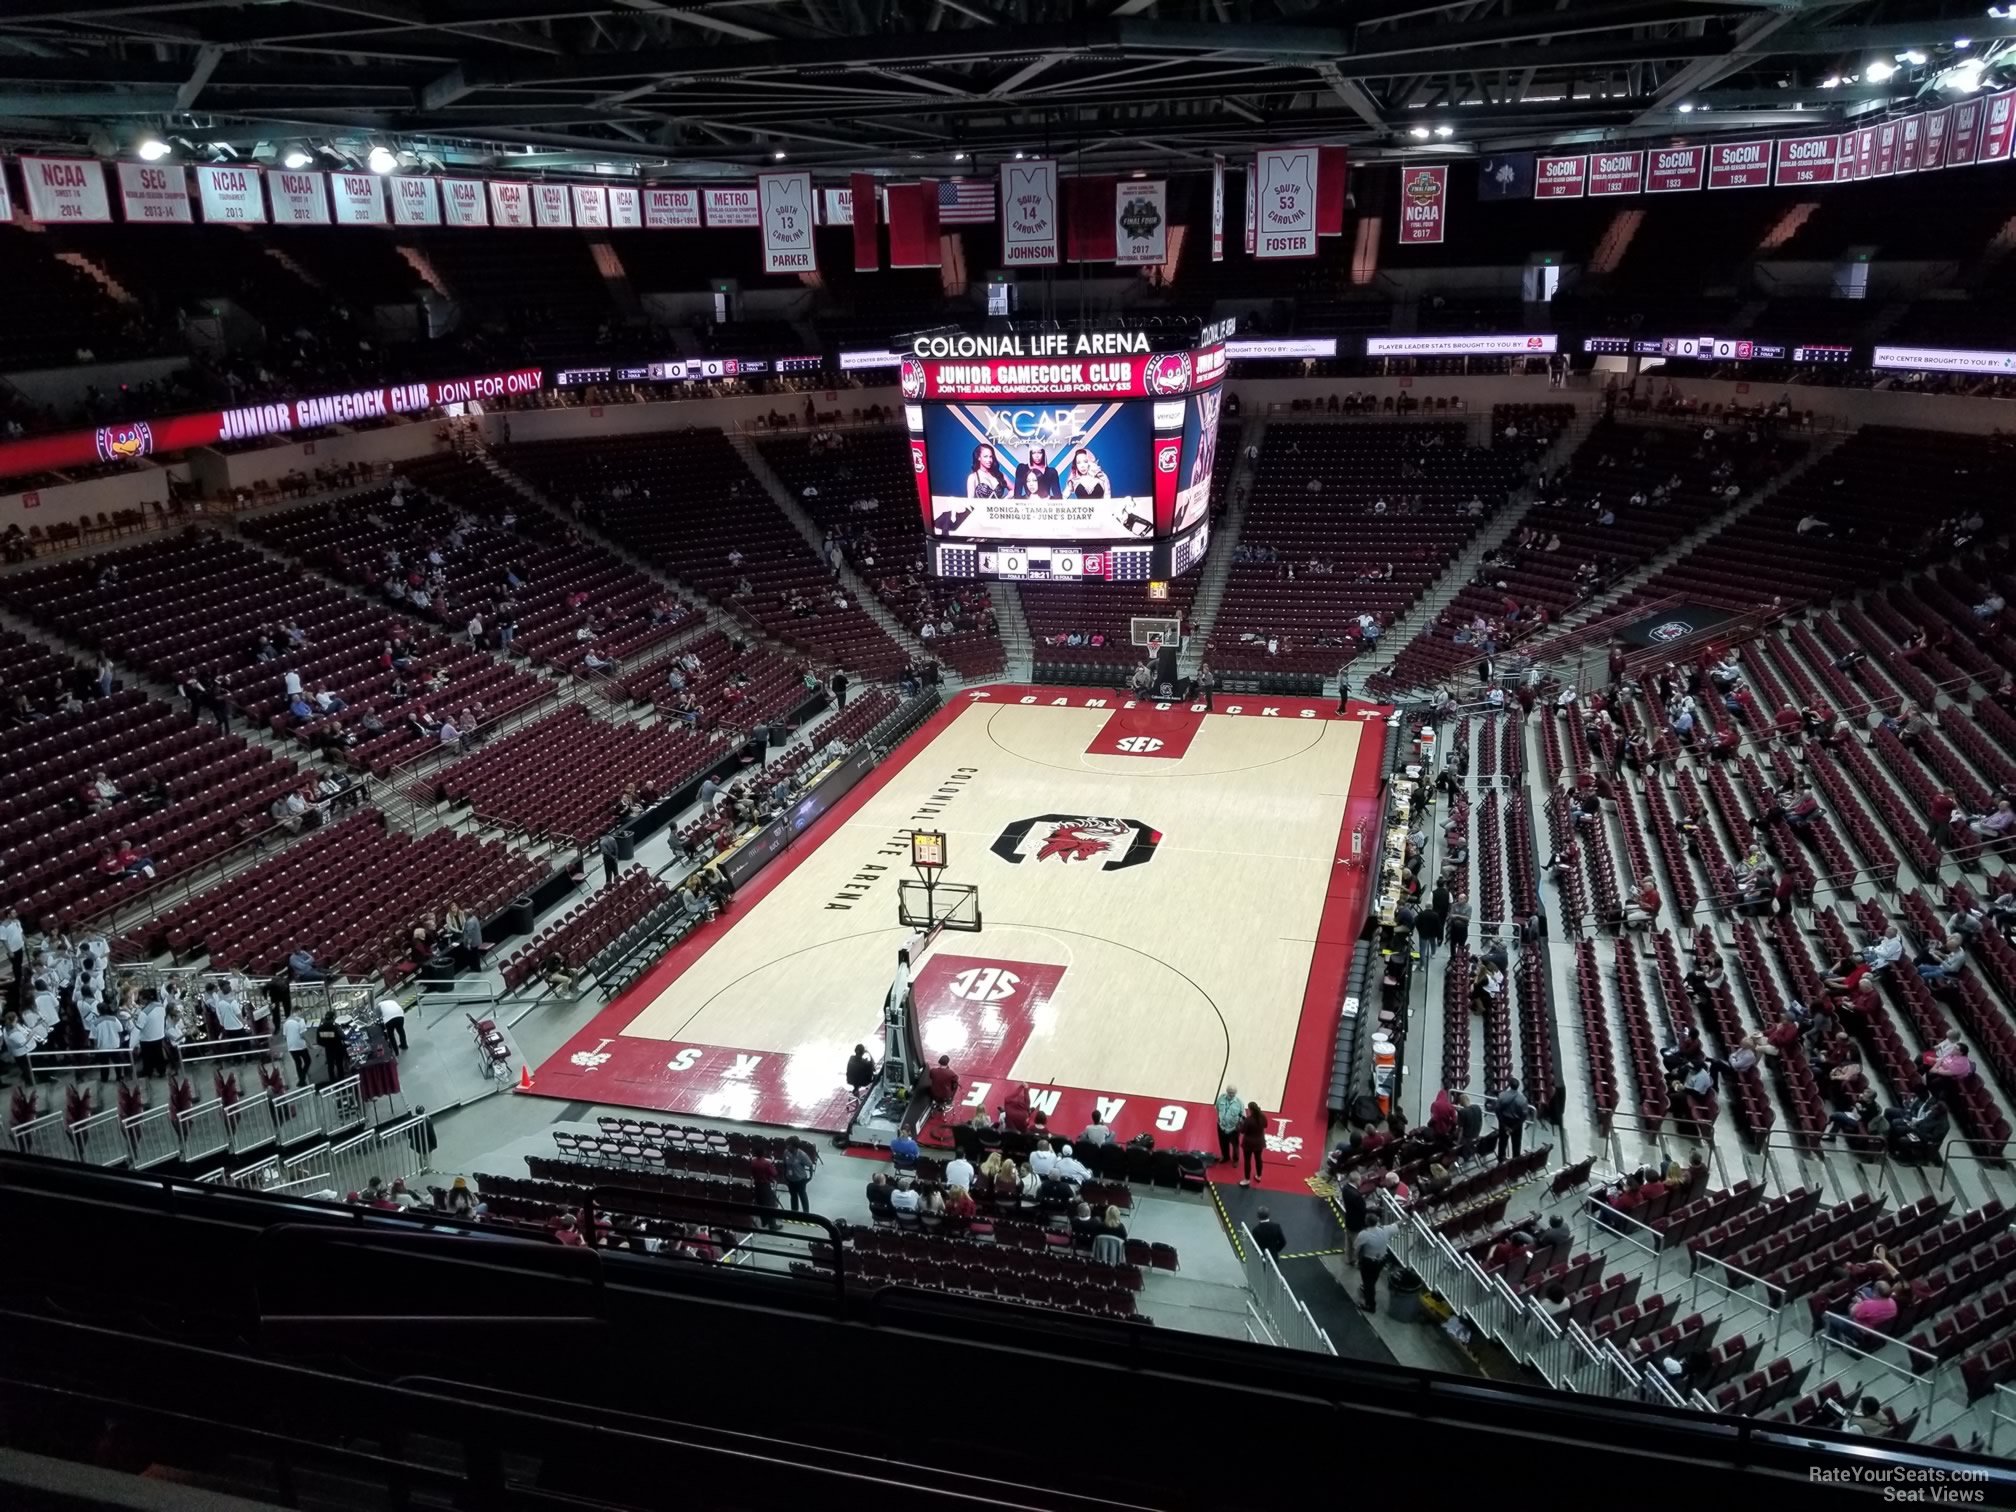 section 214, row 7 seat view  for basketball - colonial life arena